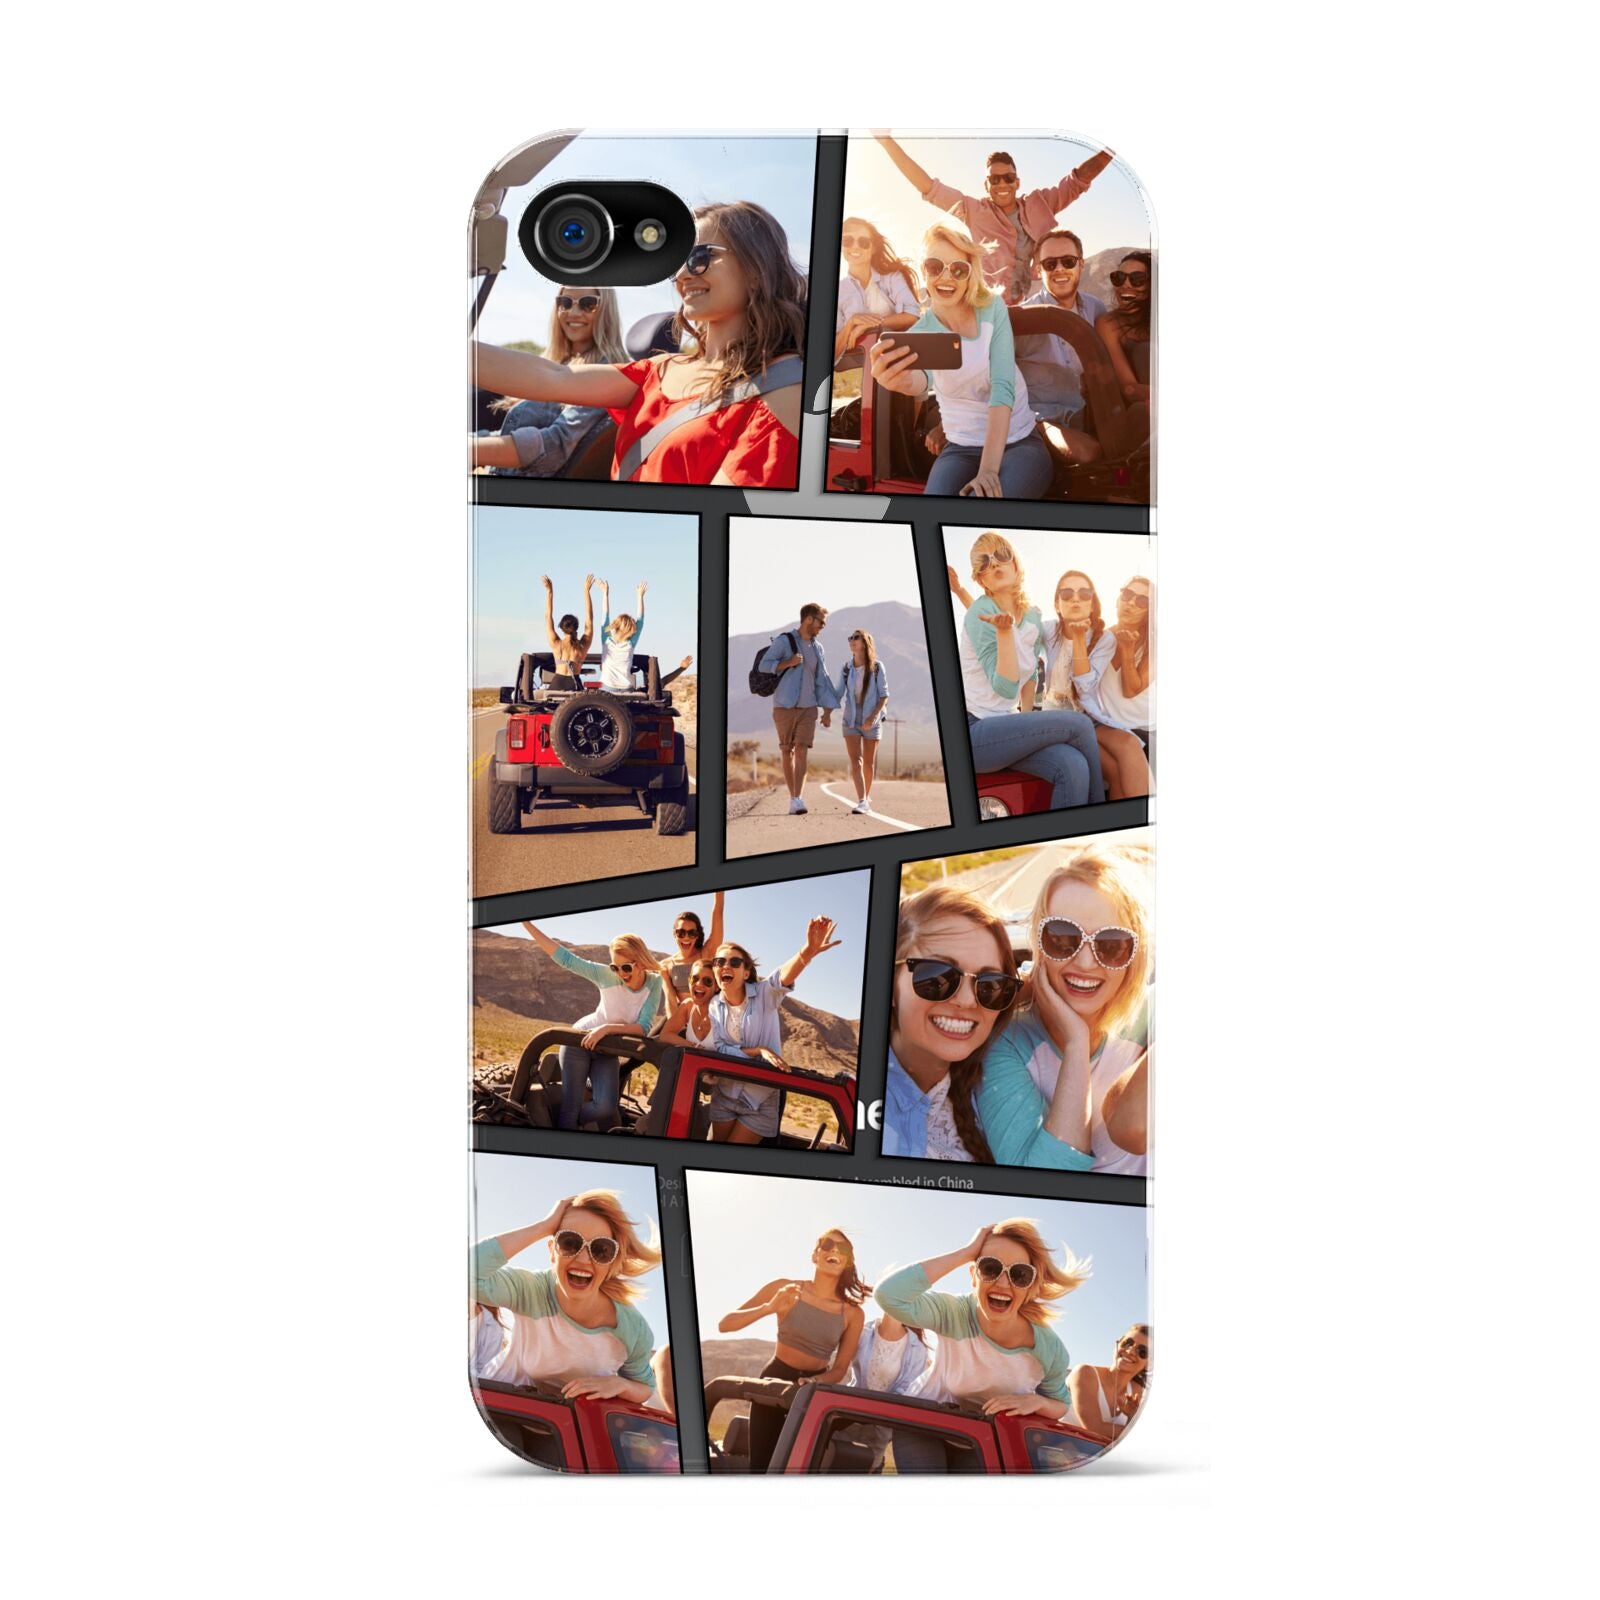 Abstract Comic Strip Photo Apple iPhone 4s Case